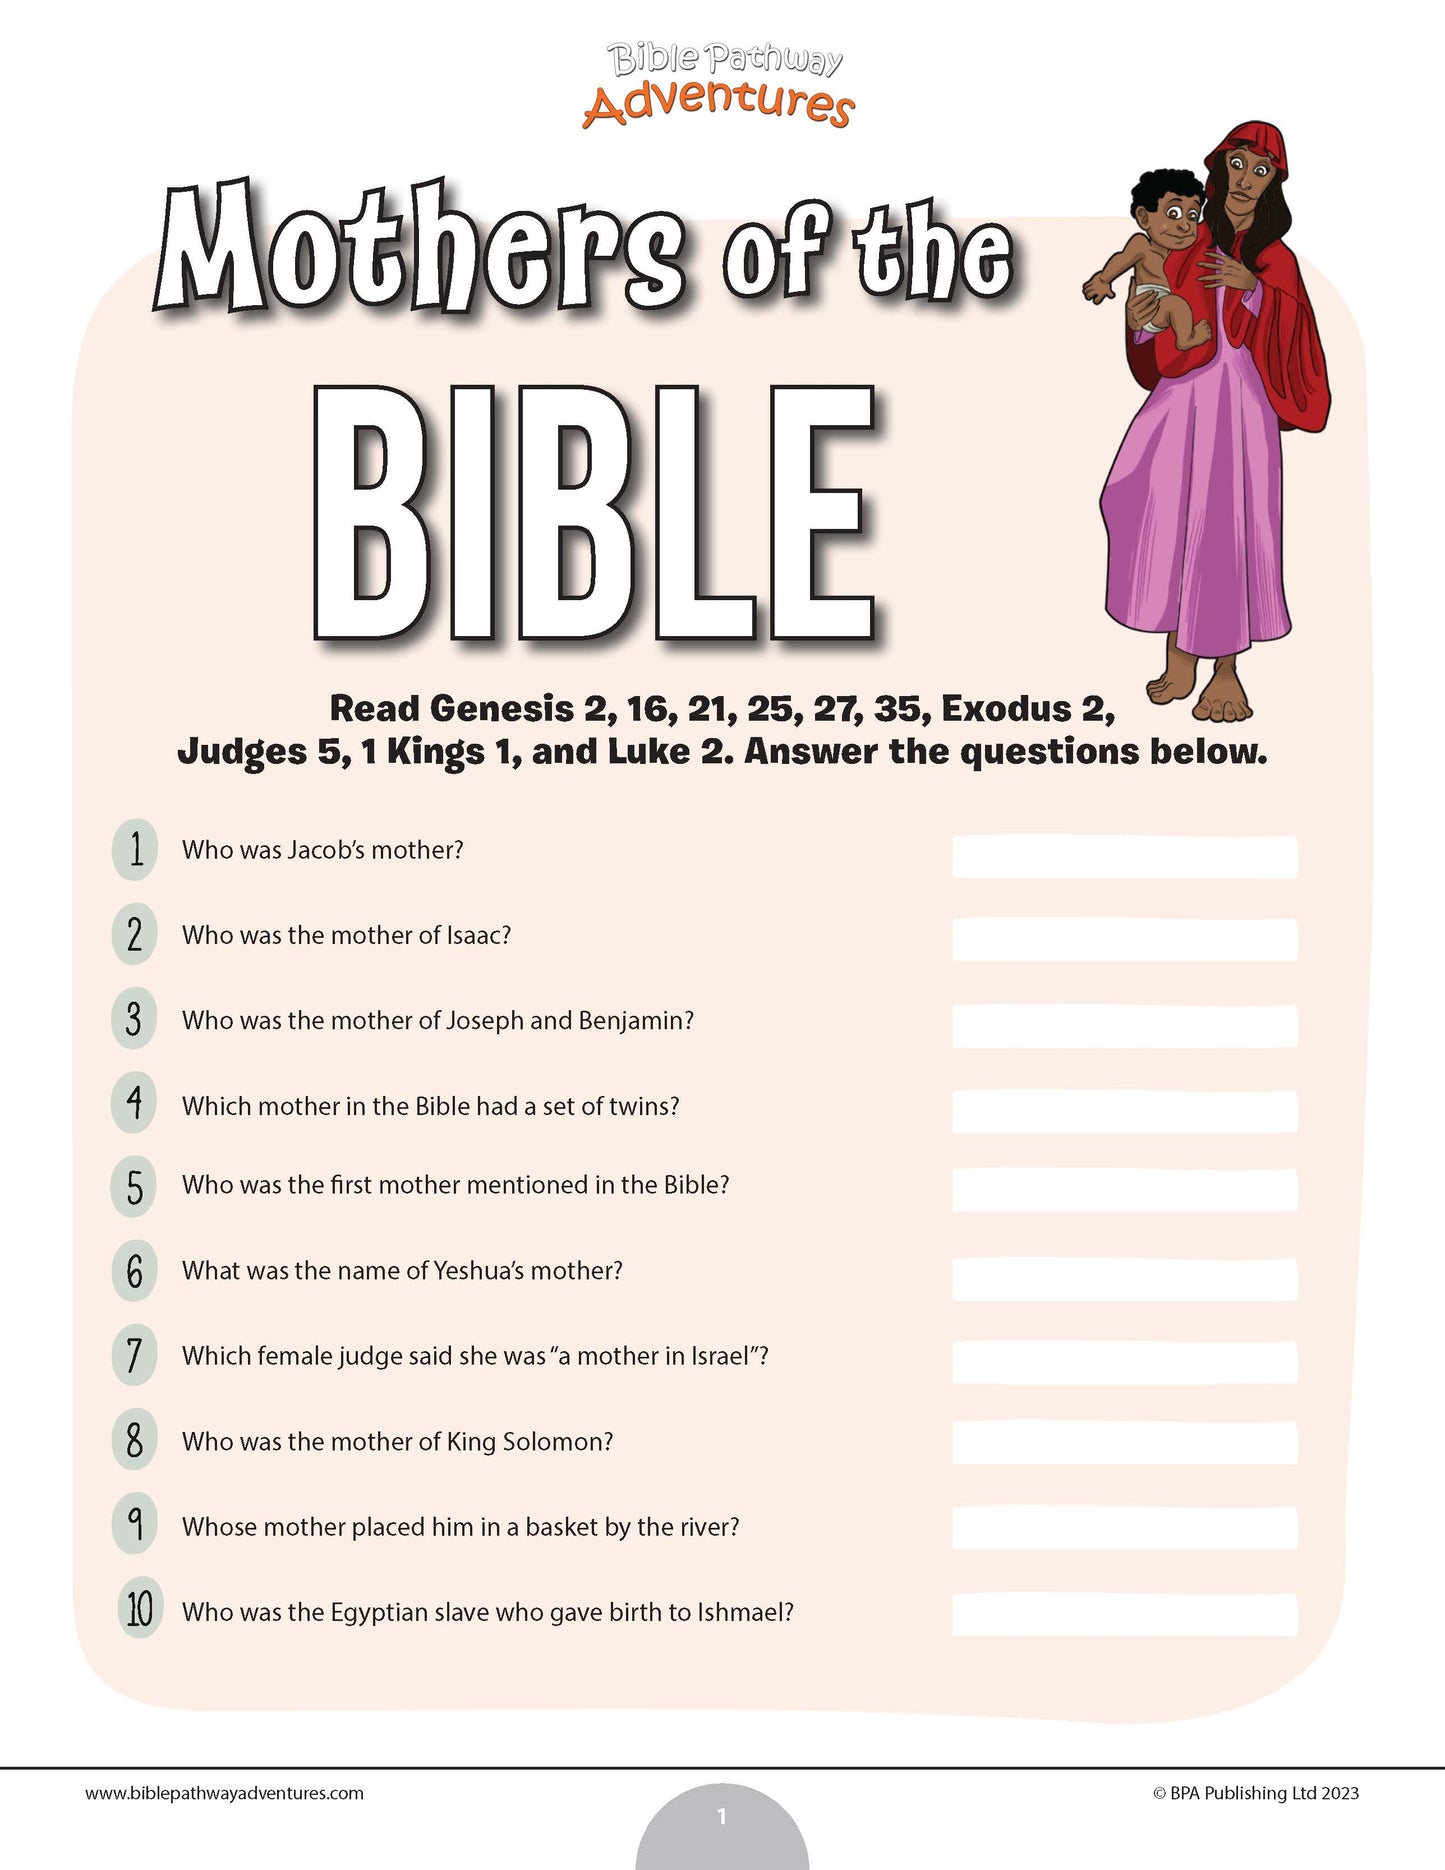 Mothers of the Bible quiz (PDF)